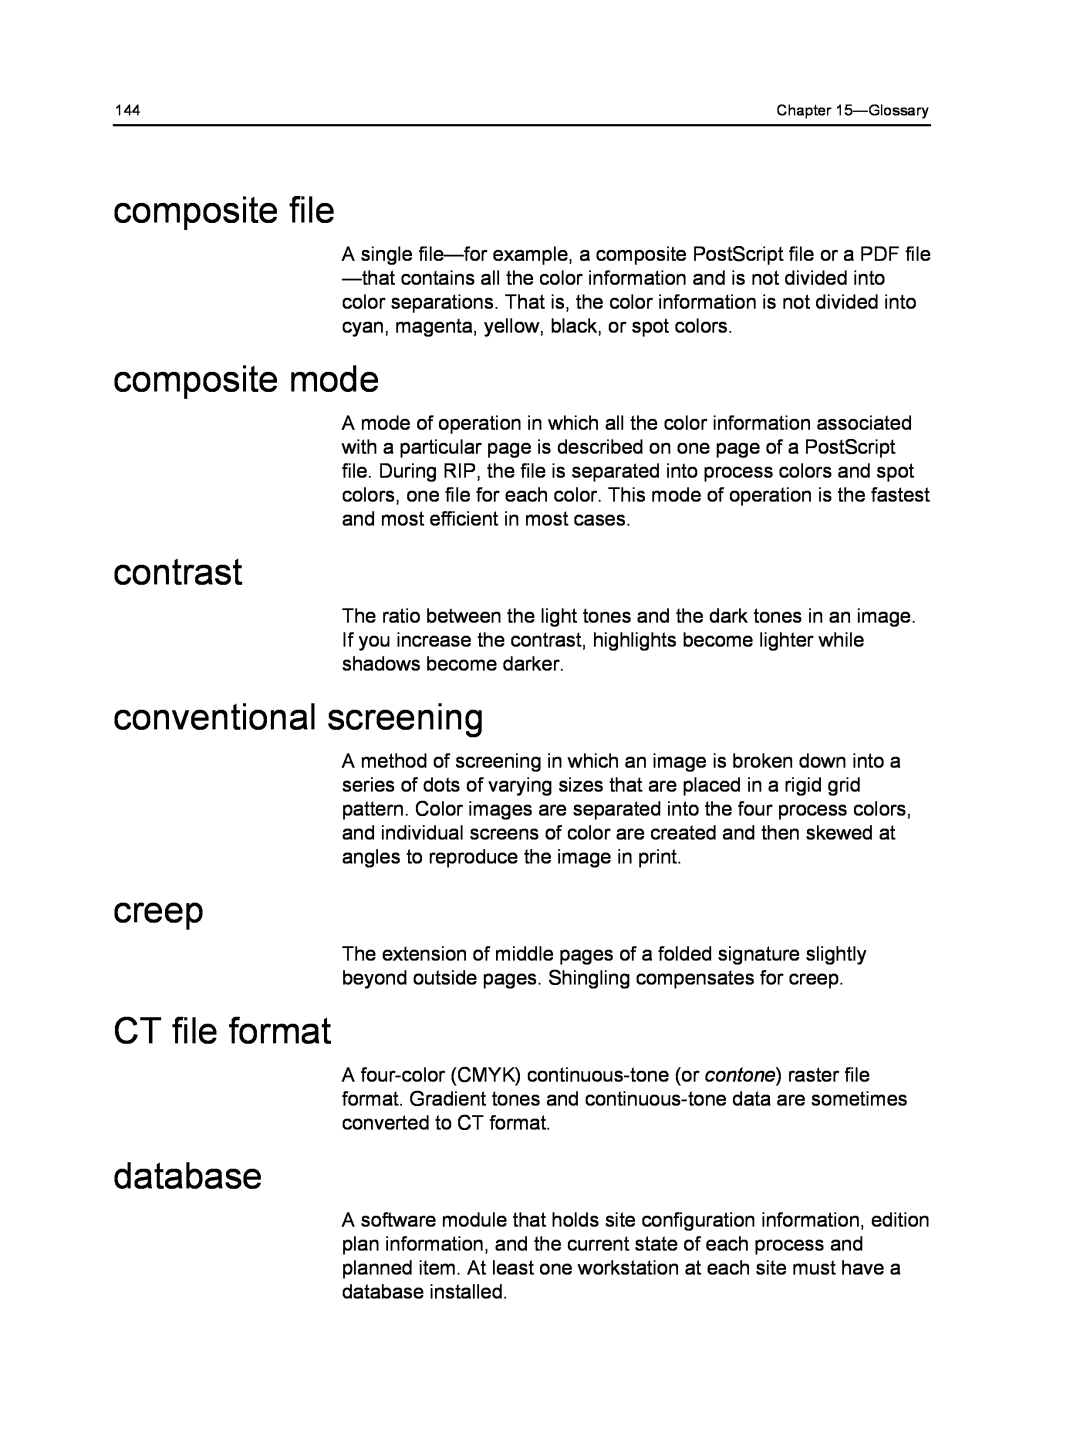 Xerox 560, 550 manual composite file, composite mode, contrast, conventional screening, creep, CT file format, database 